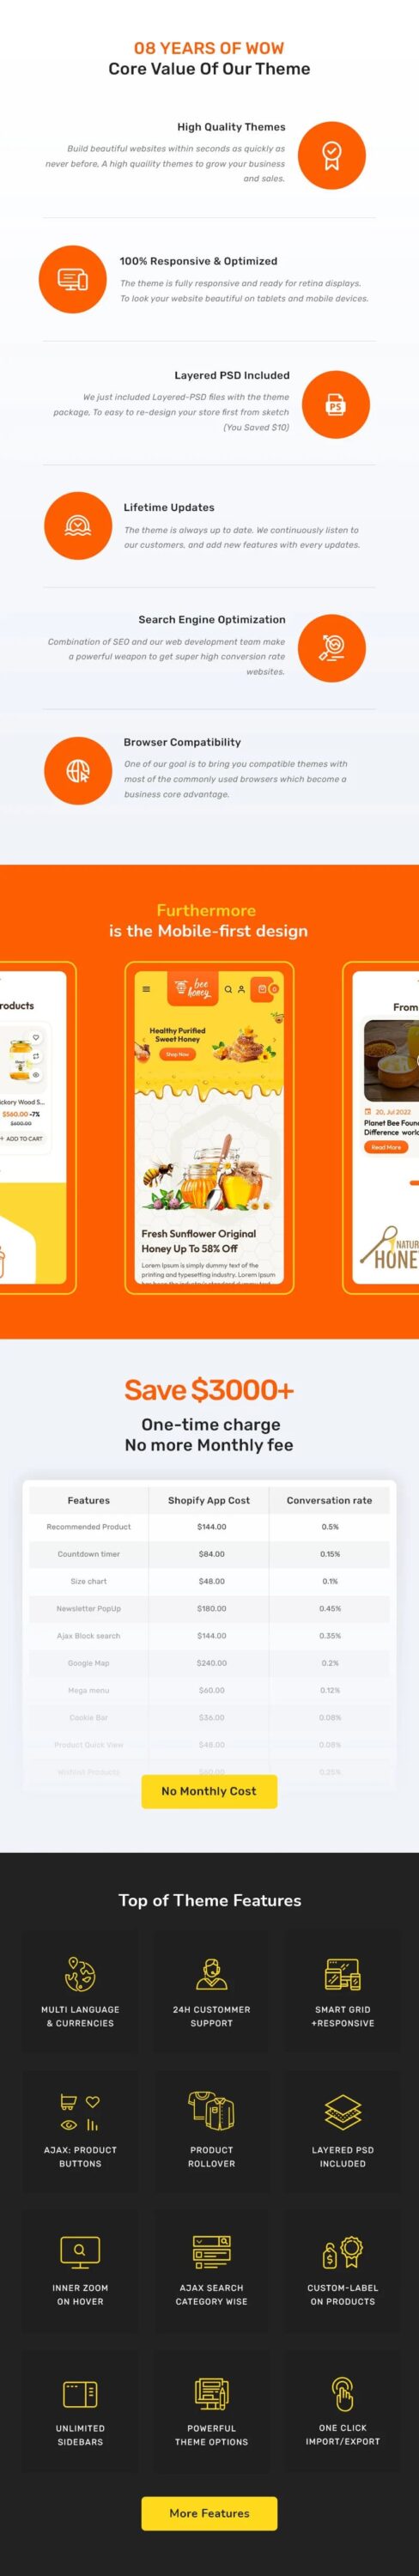 Honeybee a responsive theme: "08 Years of Wow, Core Value of Our Theme".